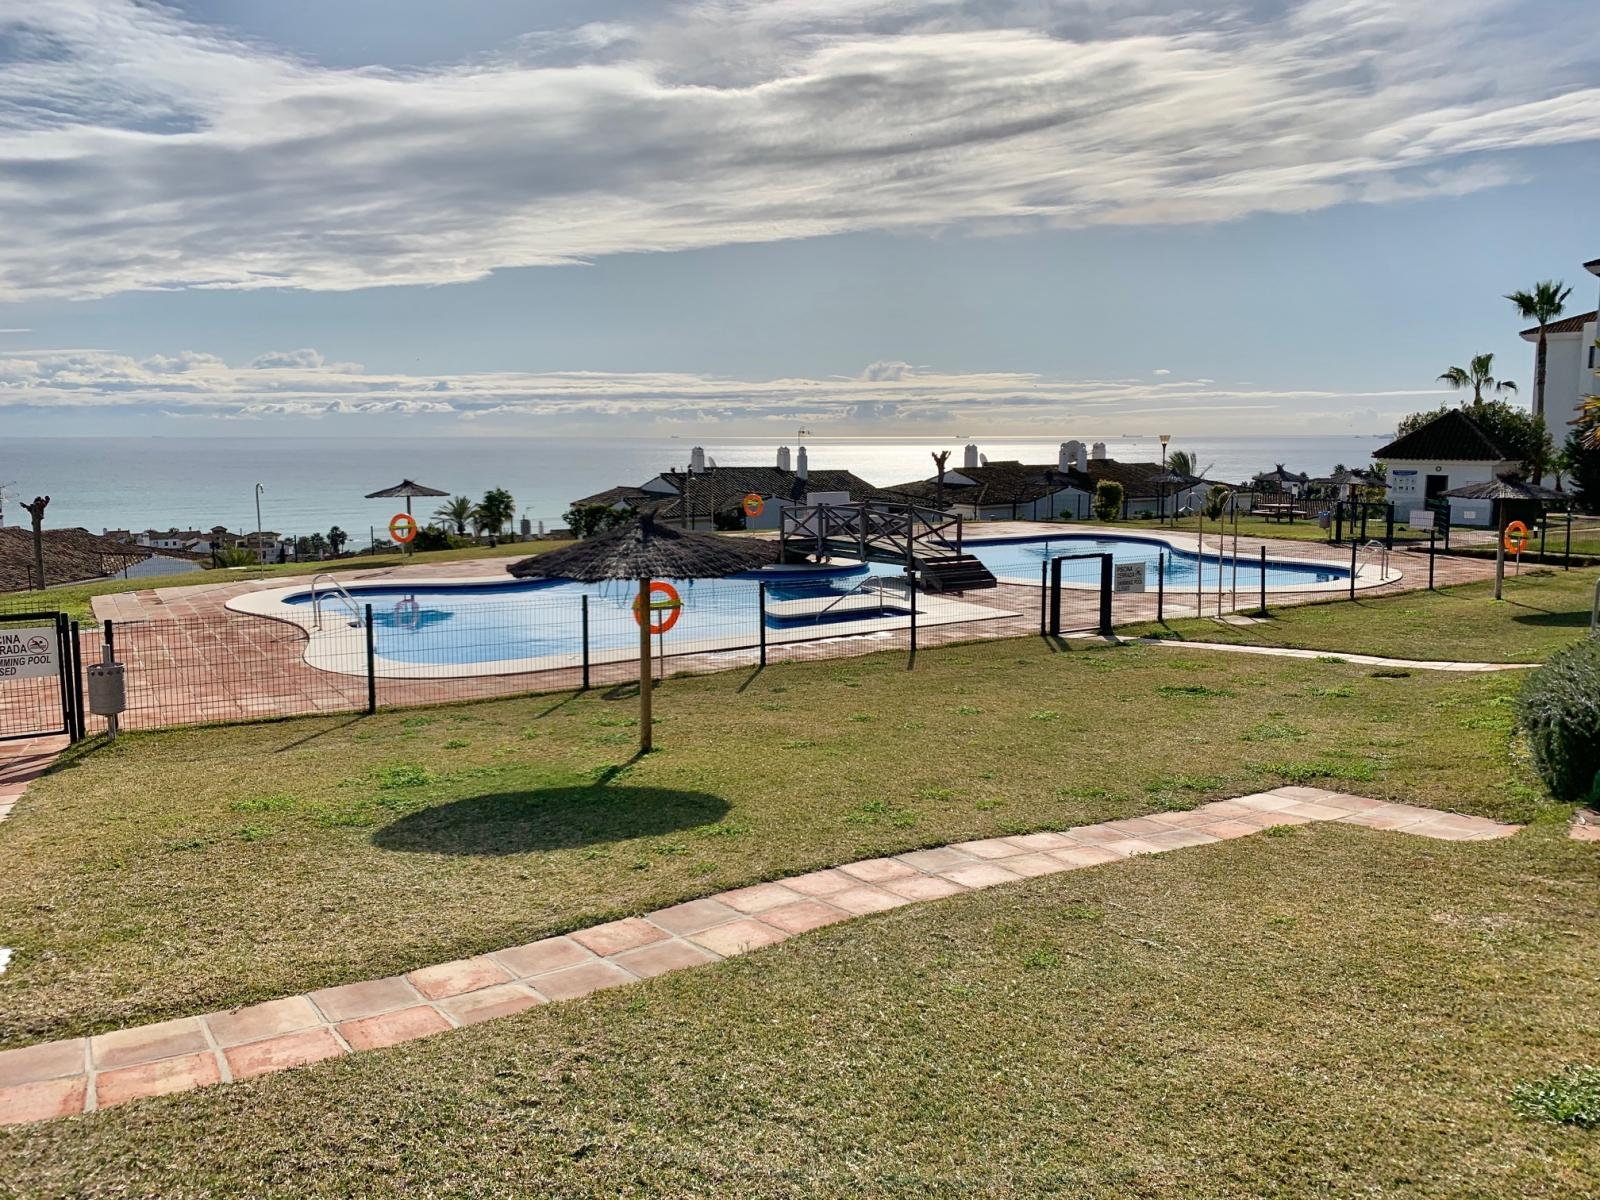 Spectacular penthouse with beautiful sea views in Alcaidesa just 200 meters from the beach